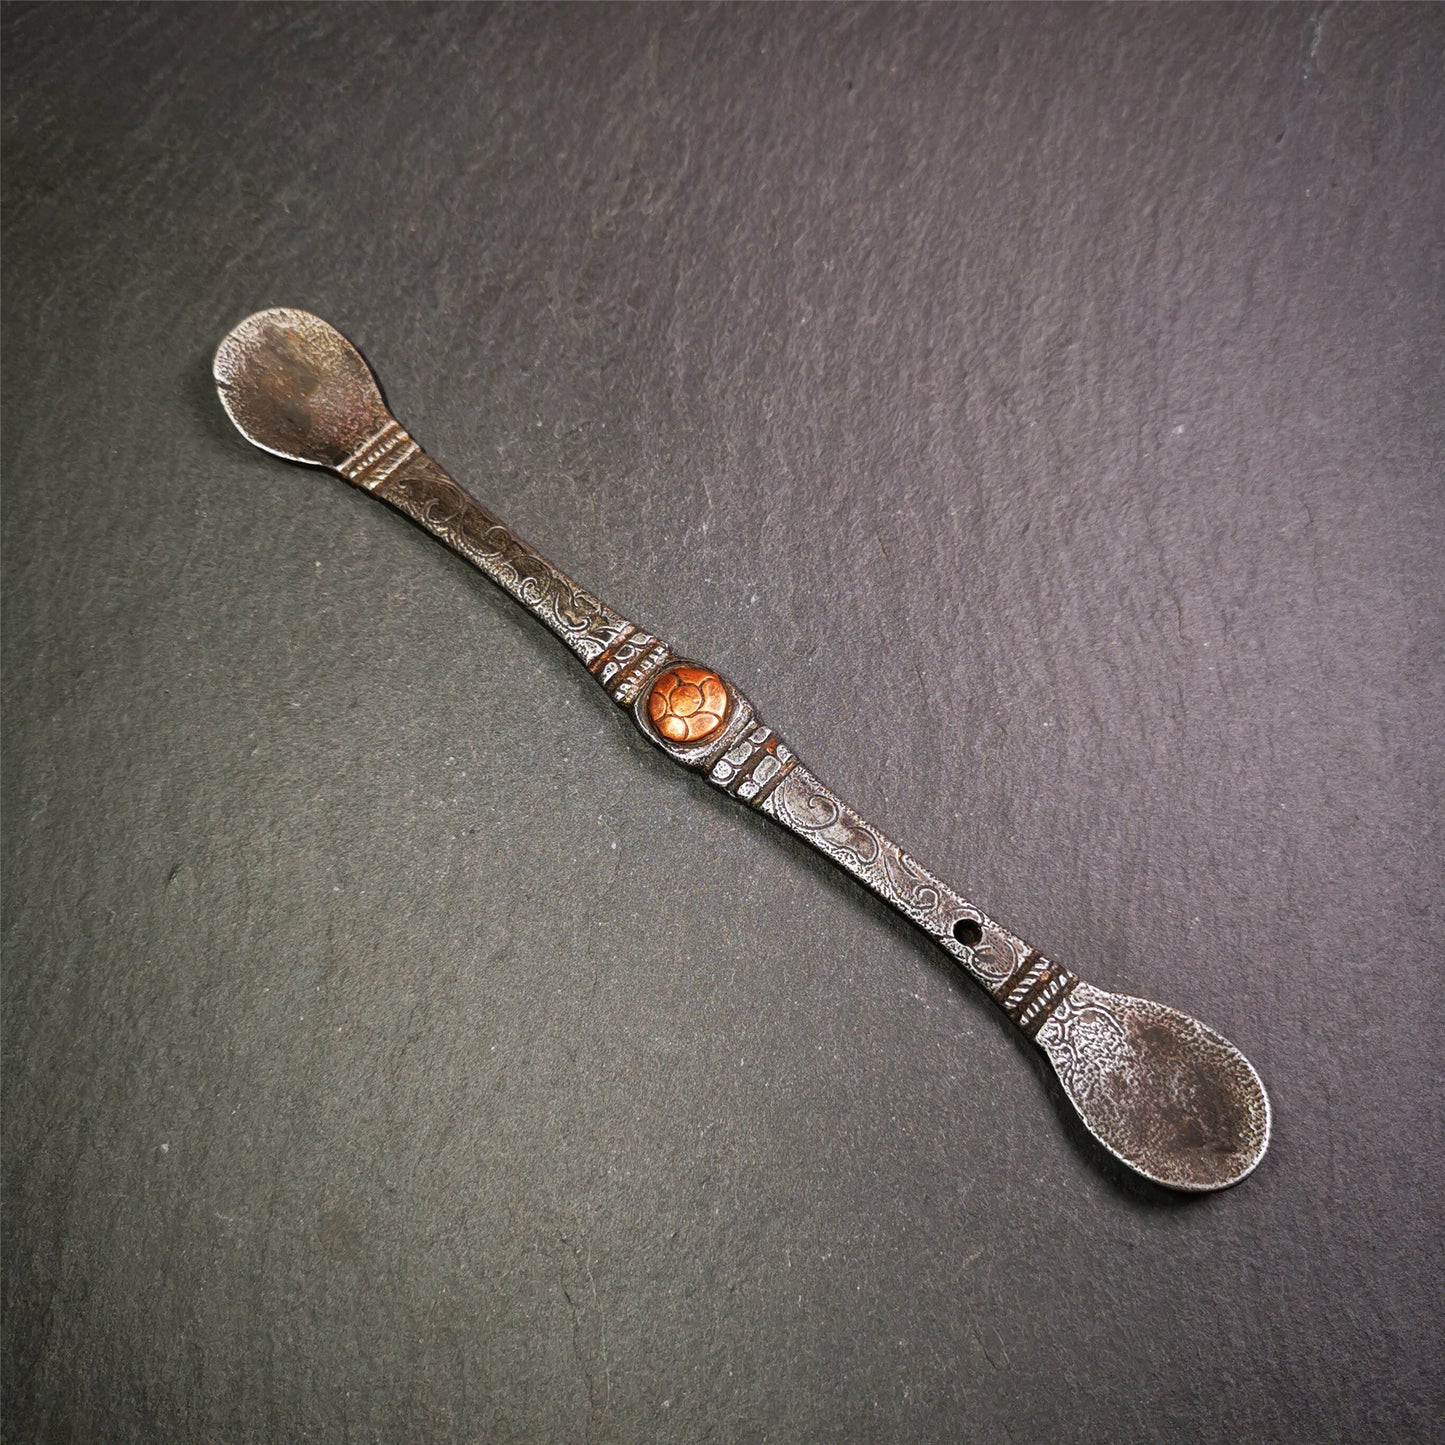 This offering spoon is handmade by Tibetan craftsmen from Hepo Town, Baiyu County,the birthplace of the famous Tibetan handicrafts. It is entirely hand-carved with cold iron and copper,lenght about 7.5 inches. You can see teh intricate engraved detail along the handle, neck and bowl,very beautiful. Religious dharma tool used in Buddhist shrine.